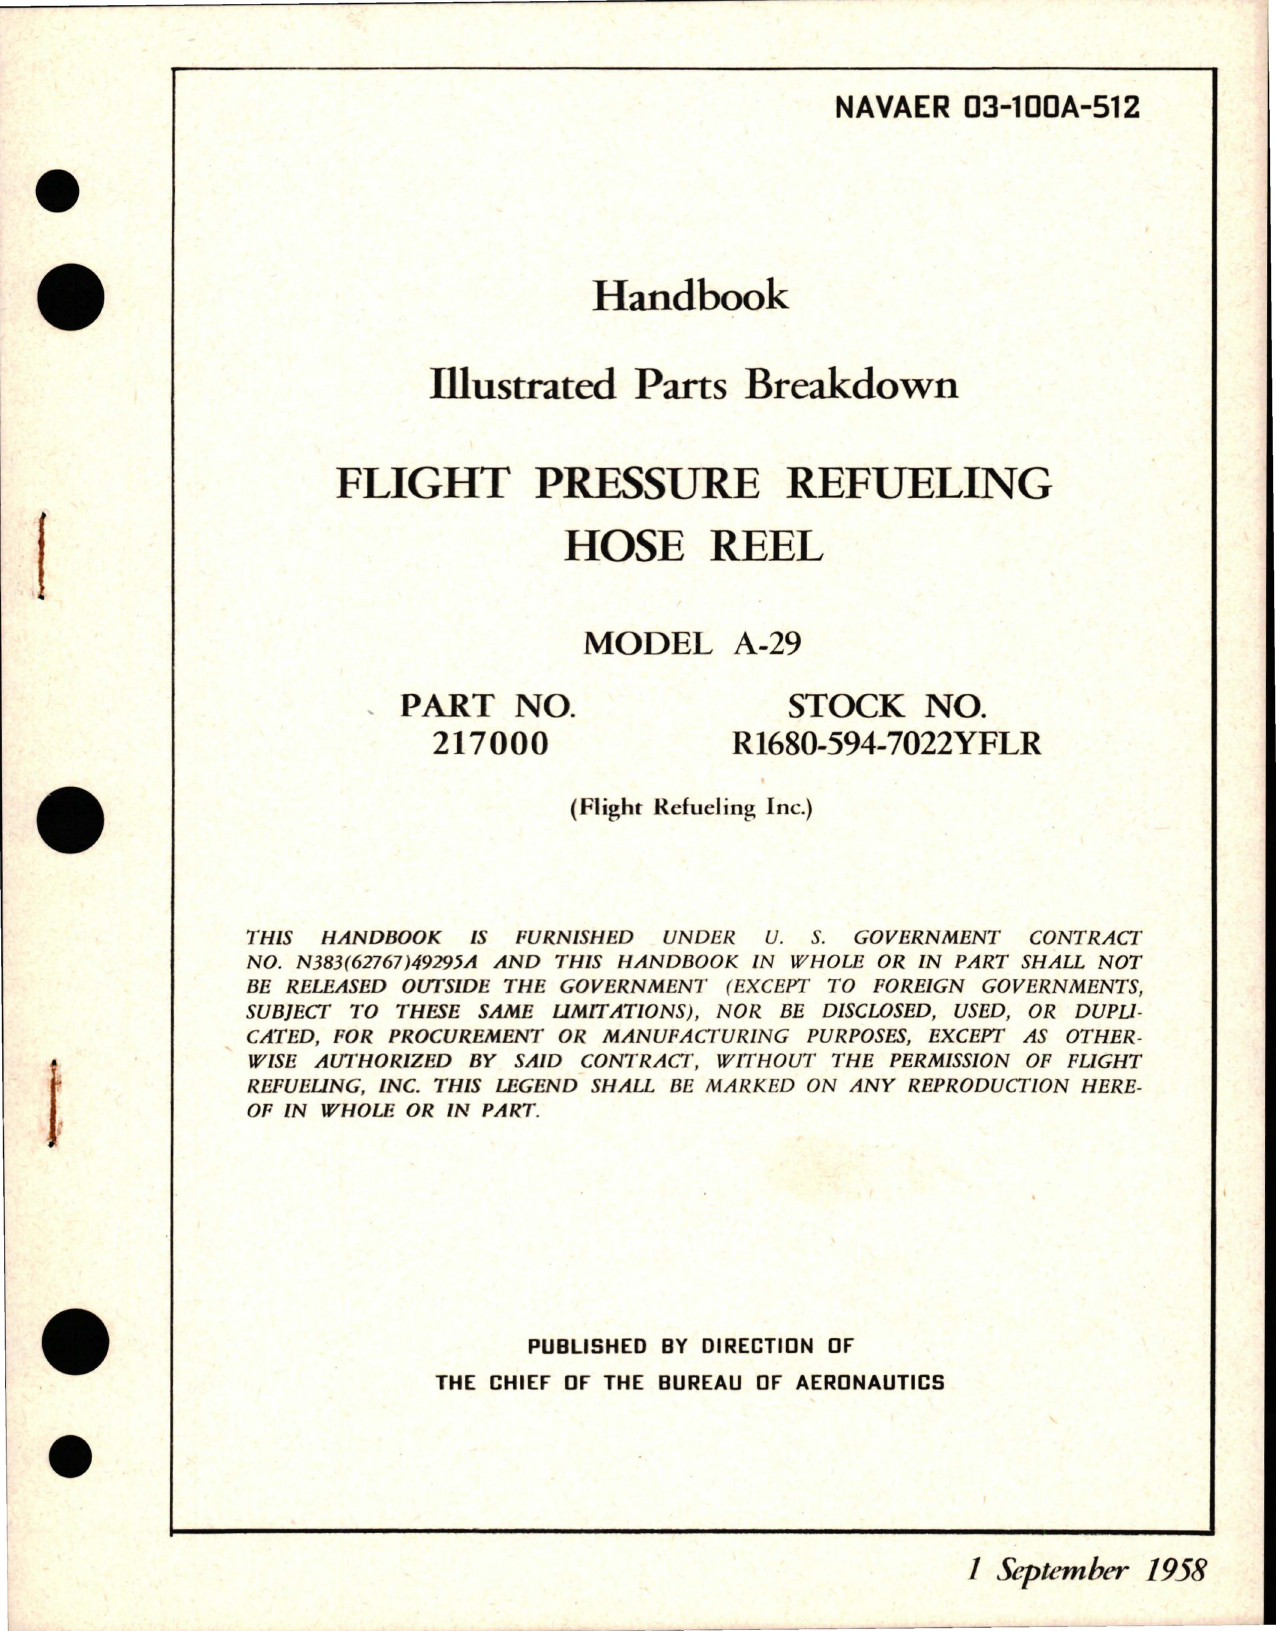 Sample page 1 from AirCorps Library document: Illustrated Parts Breakdown for Flight Pressure Refueling Hose Reel - Model A-29, Part 21700